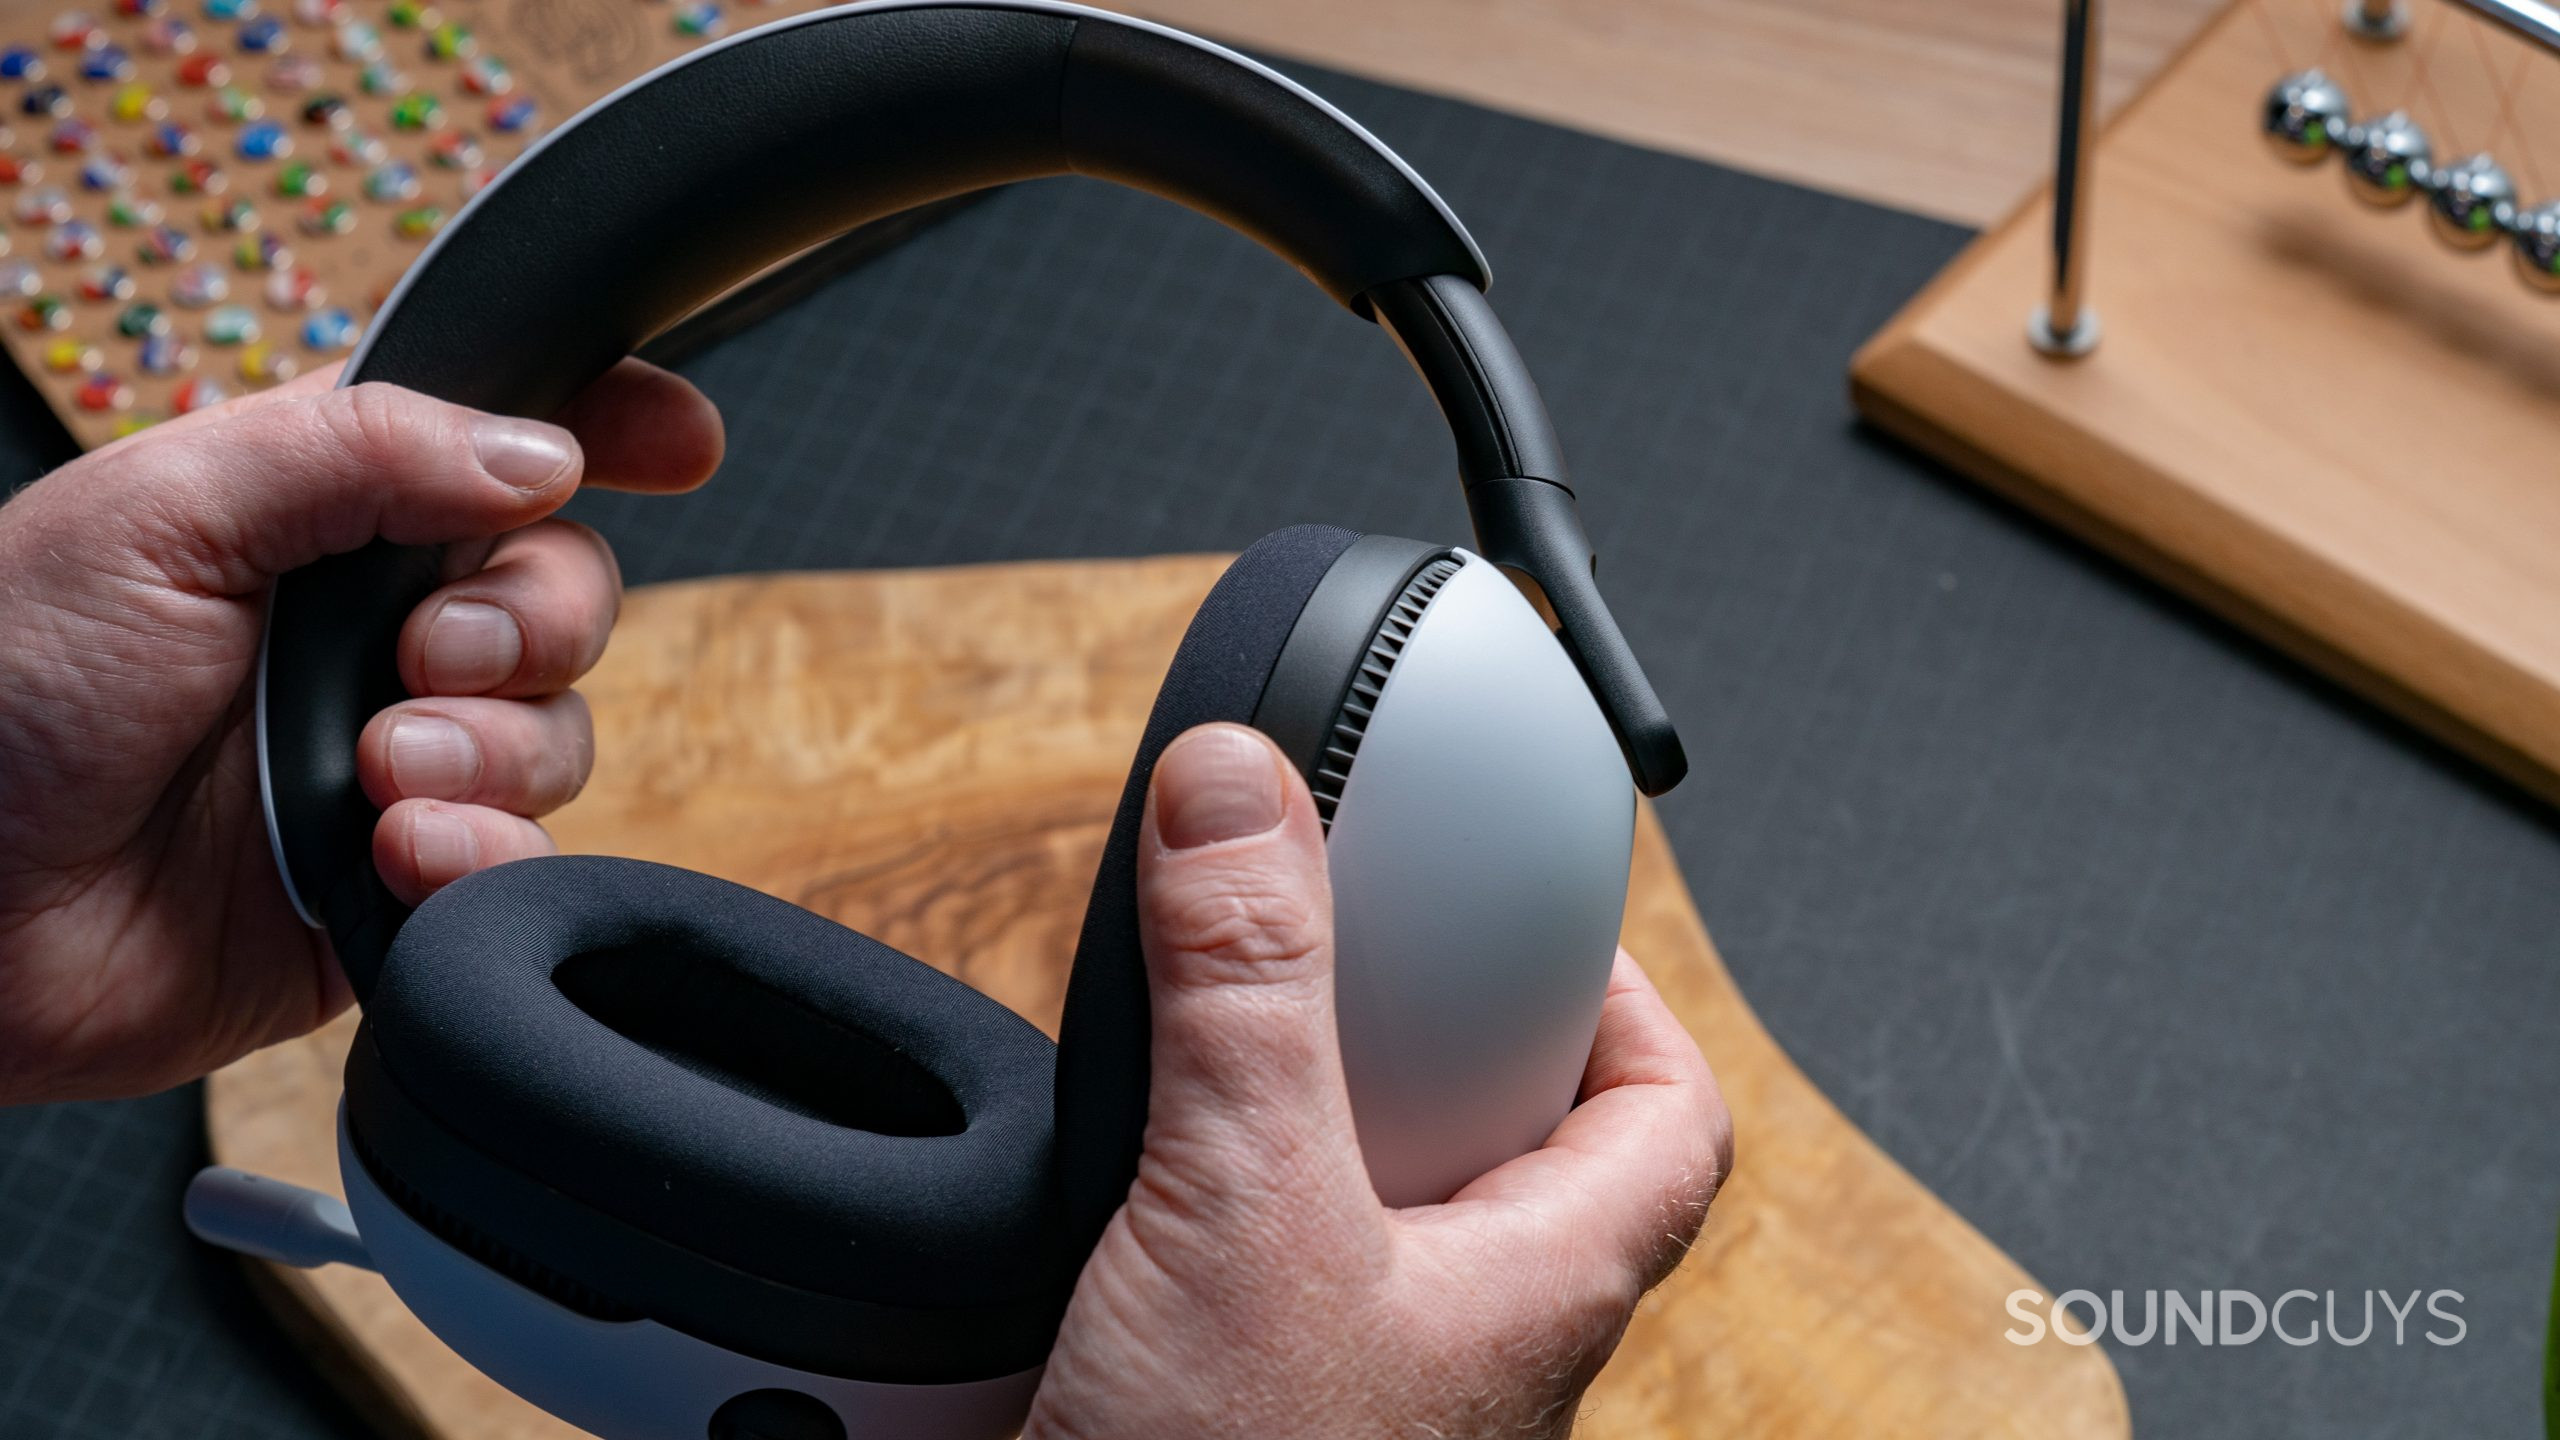 The Sony INZONE H7 gaming headset is held in someone hands.